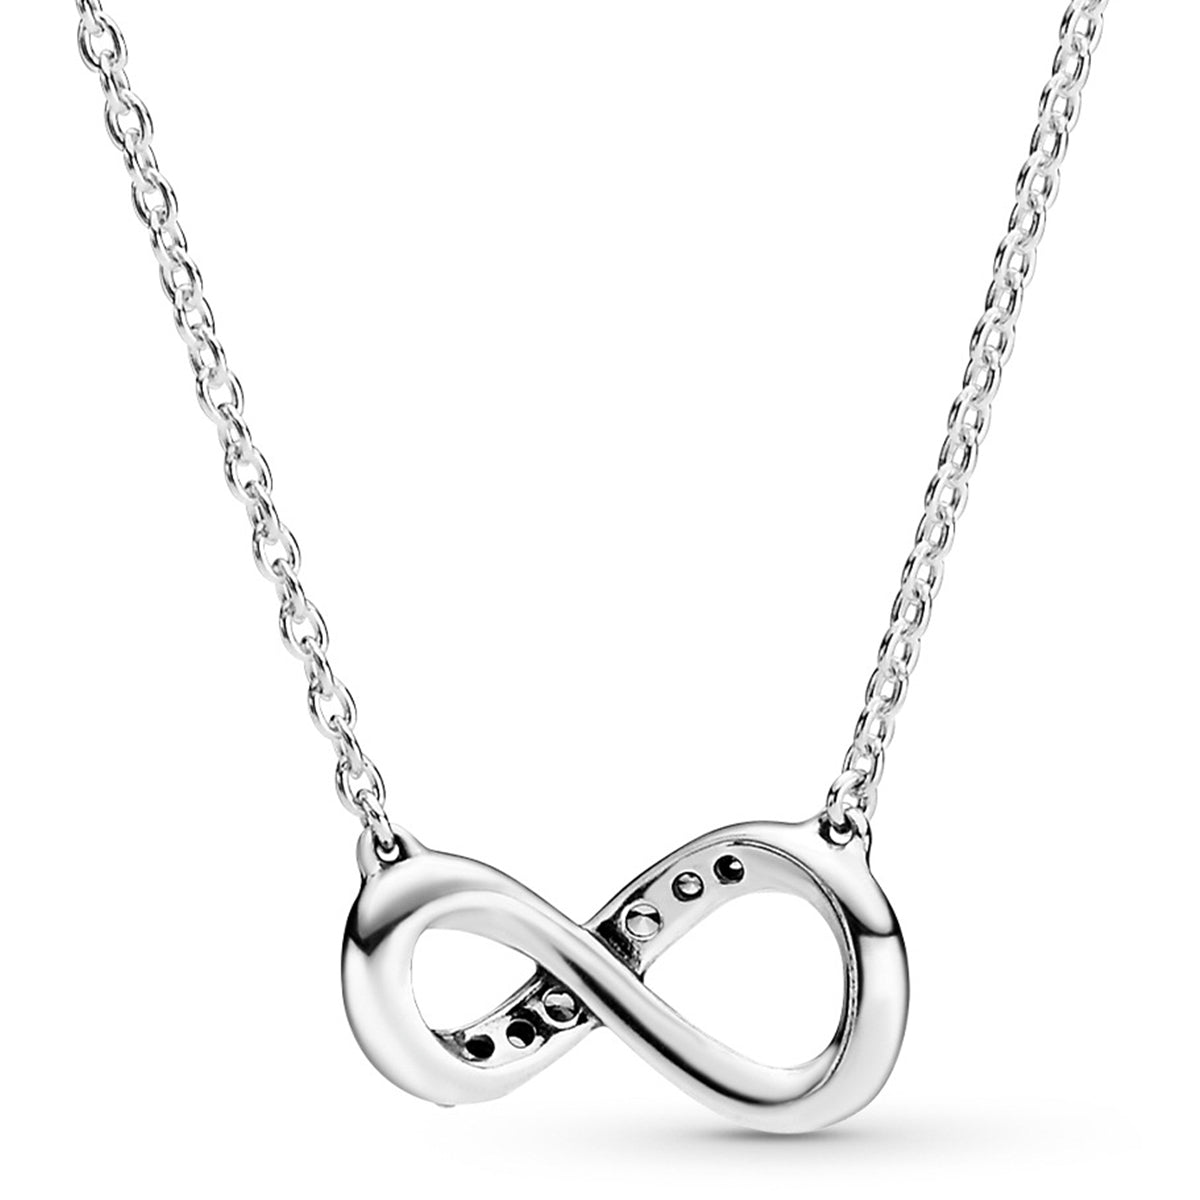 Pandora Sparkling Infinity Heart Collier Necklace | REEDS Jewelers